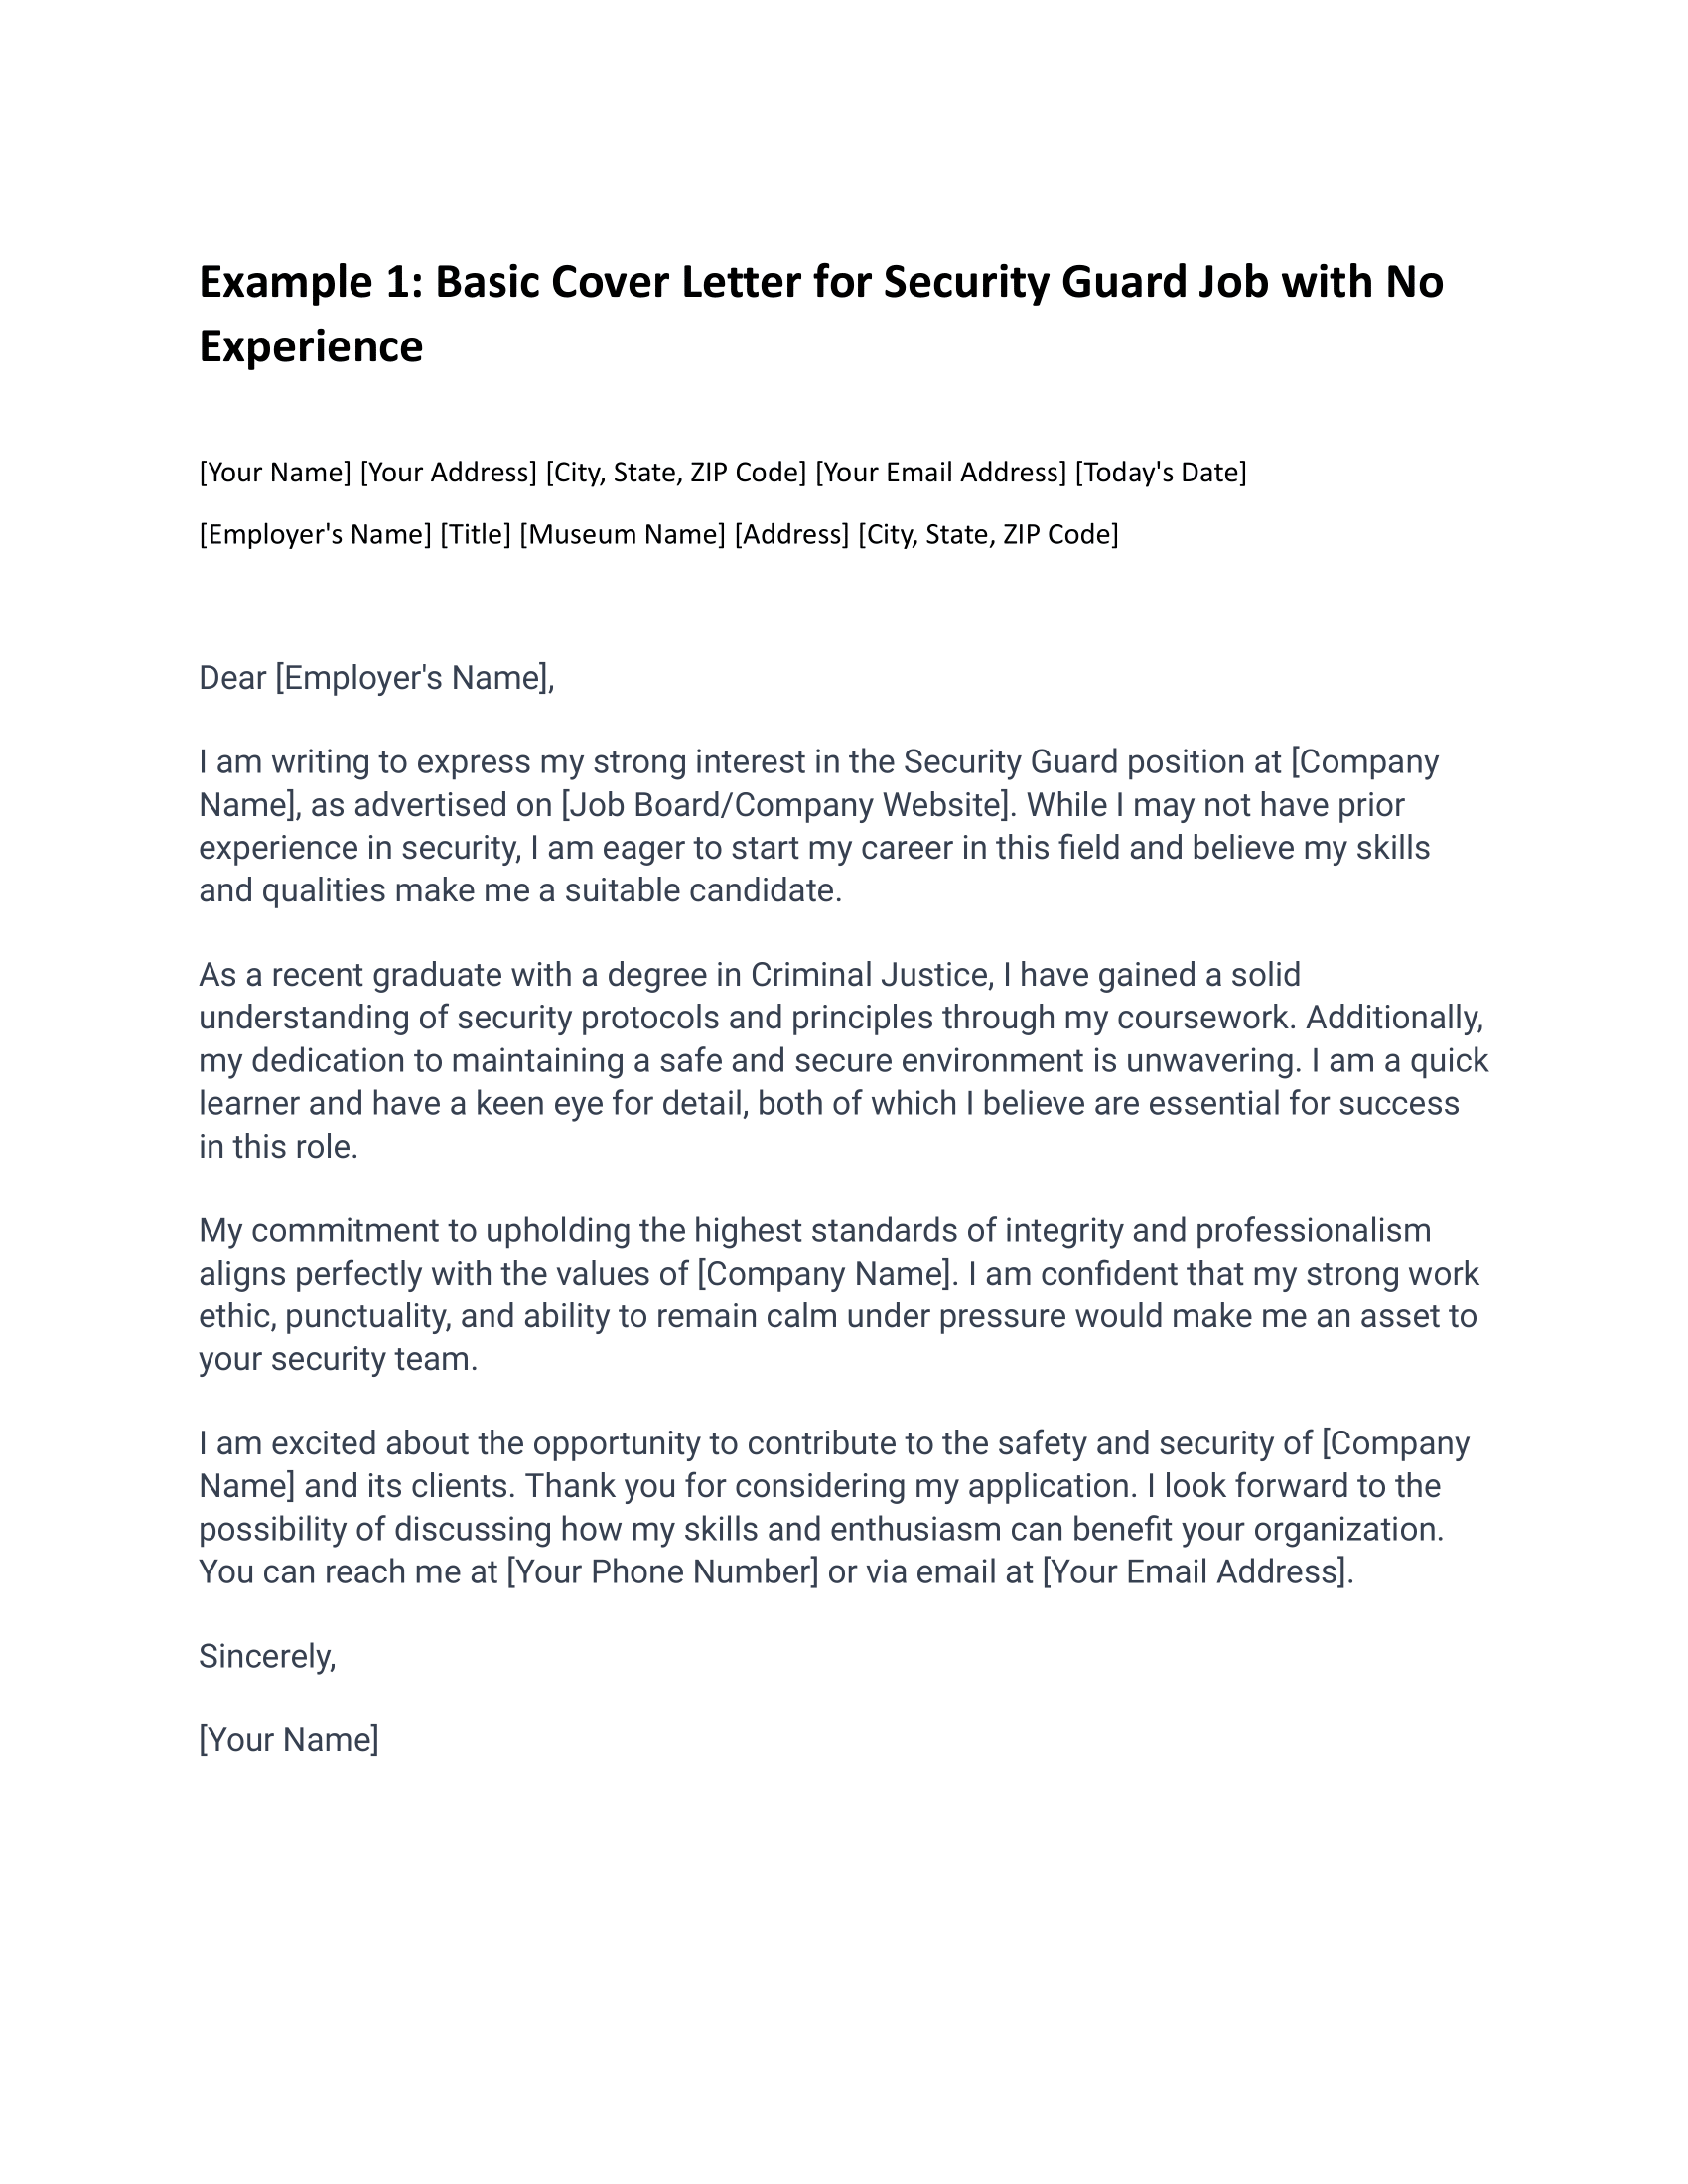 Basic Cover Letter for Security Guard Job with No Experience